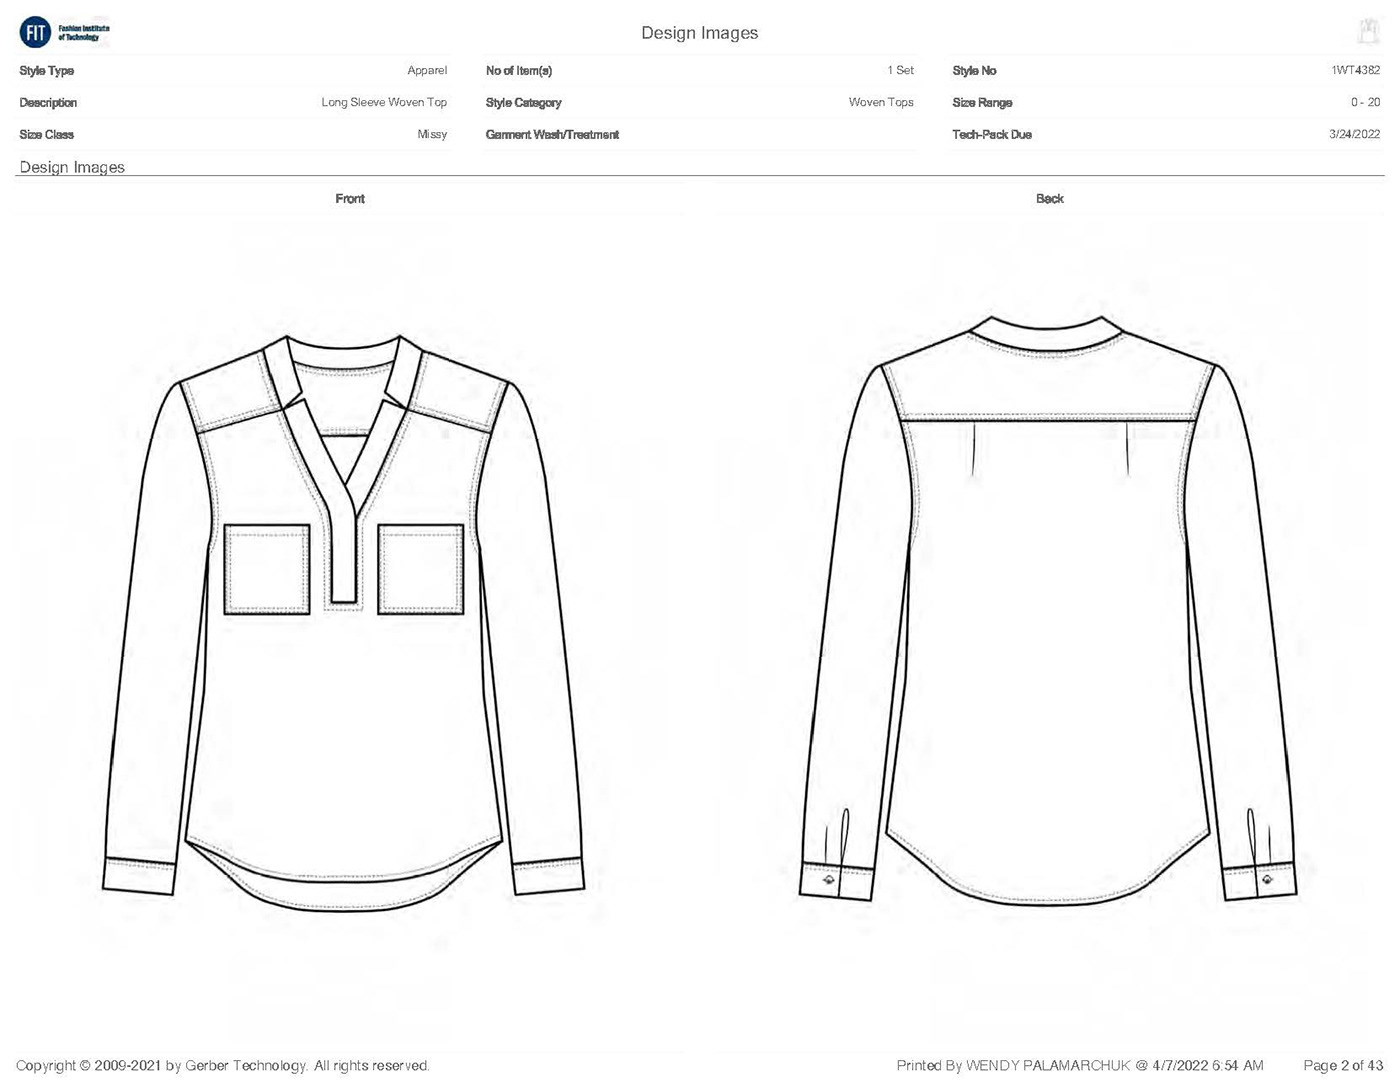 apparel cad fashion design Flat Sketch patternmaking Tech Pack Technical Design technical drawing womenswear Wovens